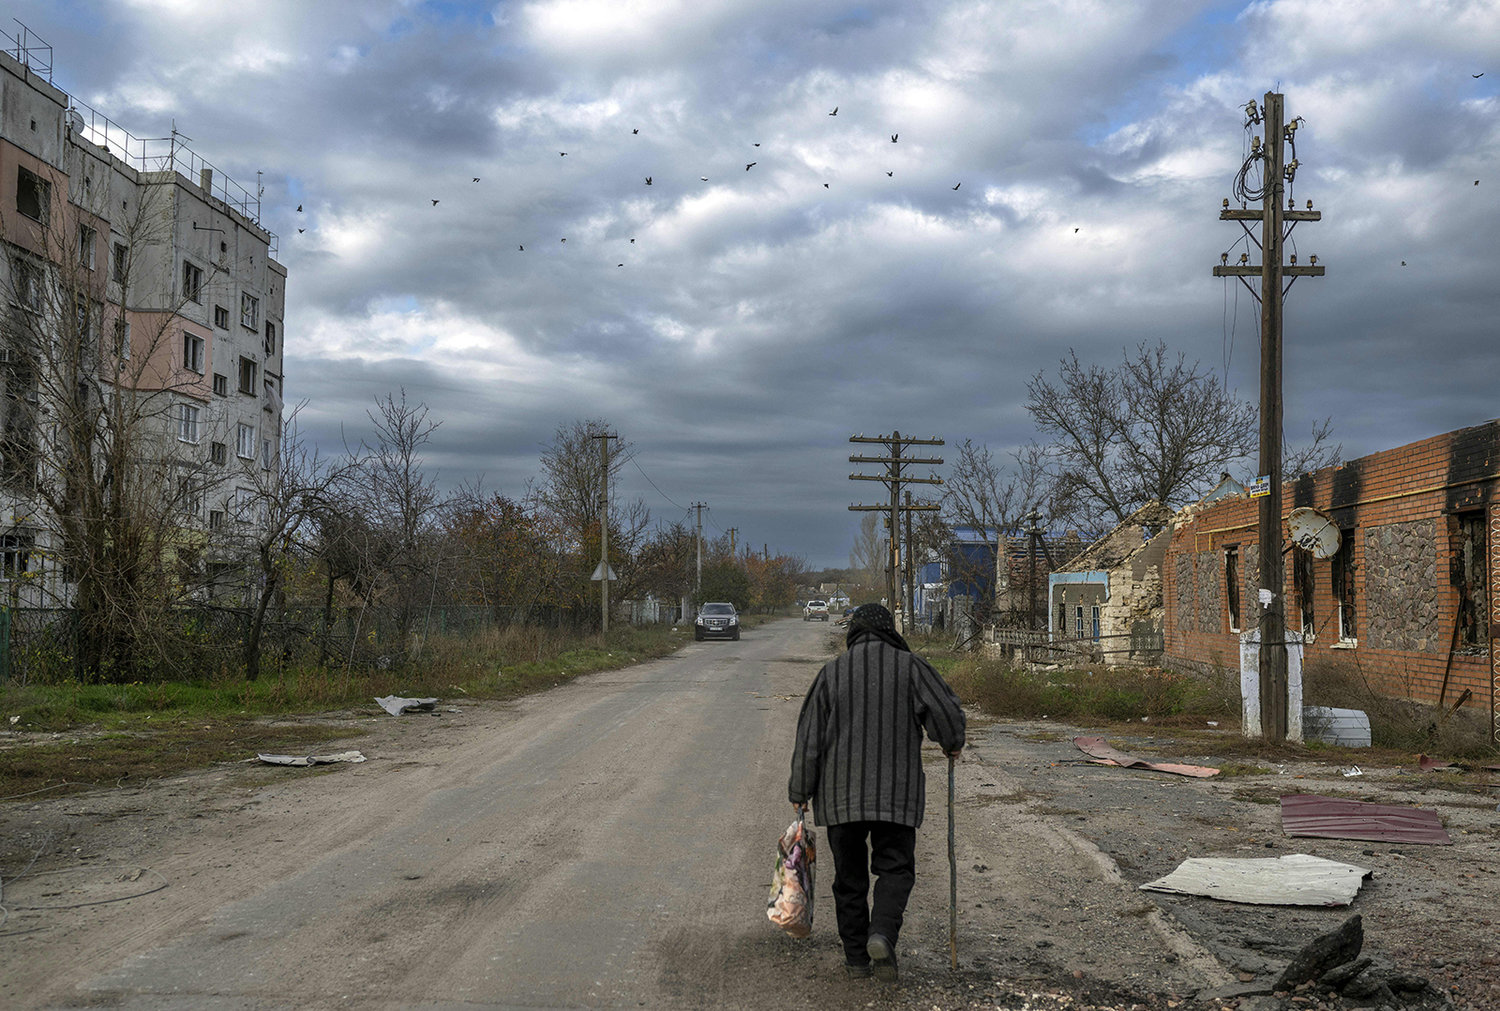 An old woman walks in the Kherson region village of Arkhanhelske on Nov. 3, 2022, which was formerly occupied by Russian forces. (Bulent Kilic/AFP via Getty Images/TNS)